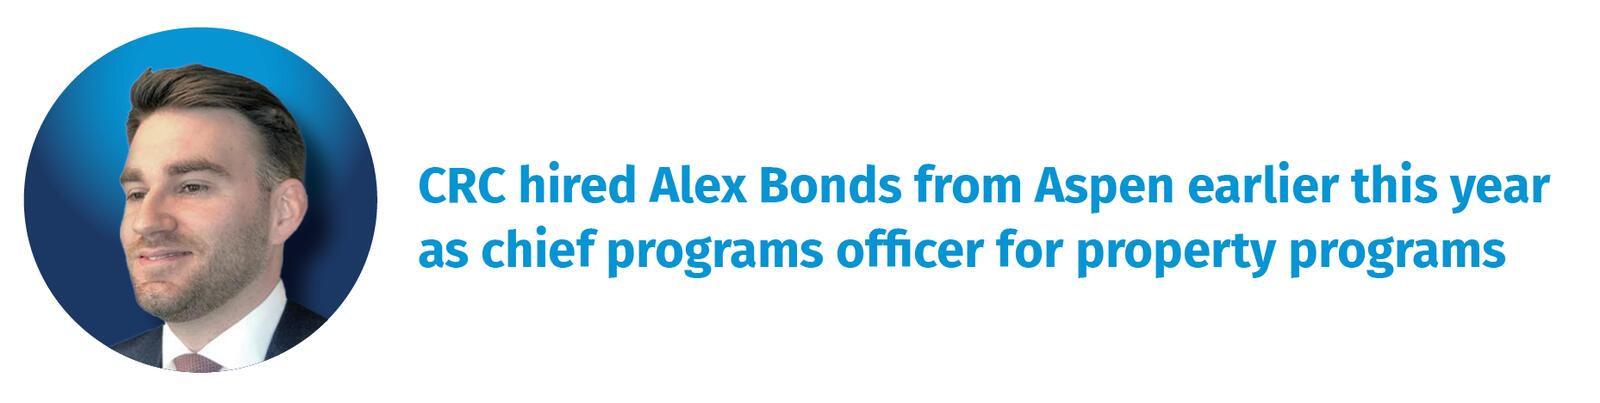 CRC hired Alex Bonds from Aspen earlier this year as chief programs officer for property programs